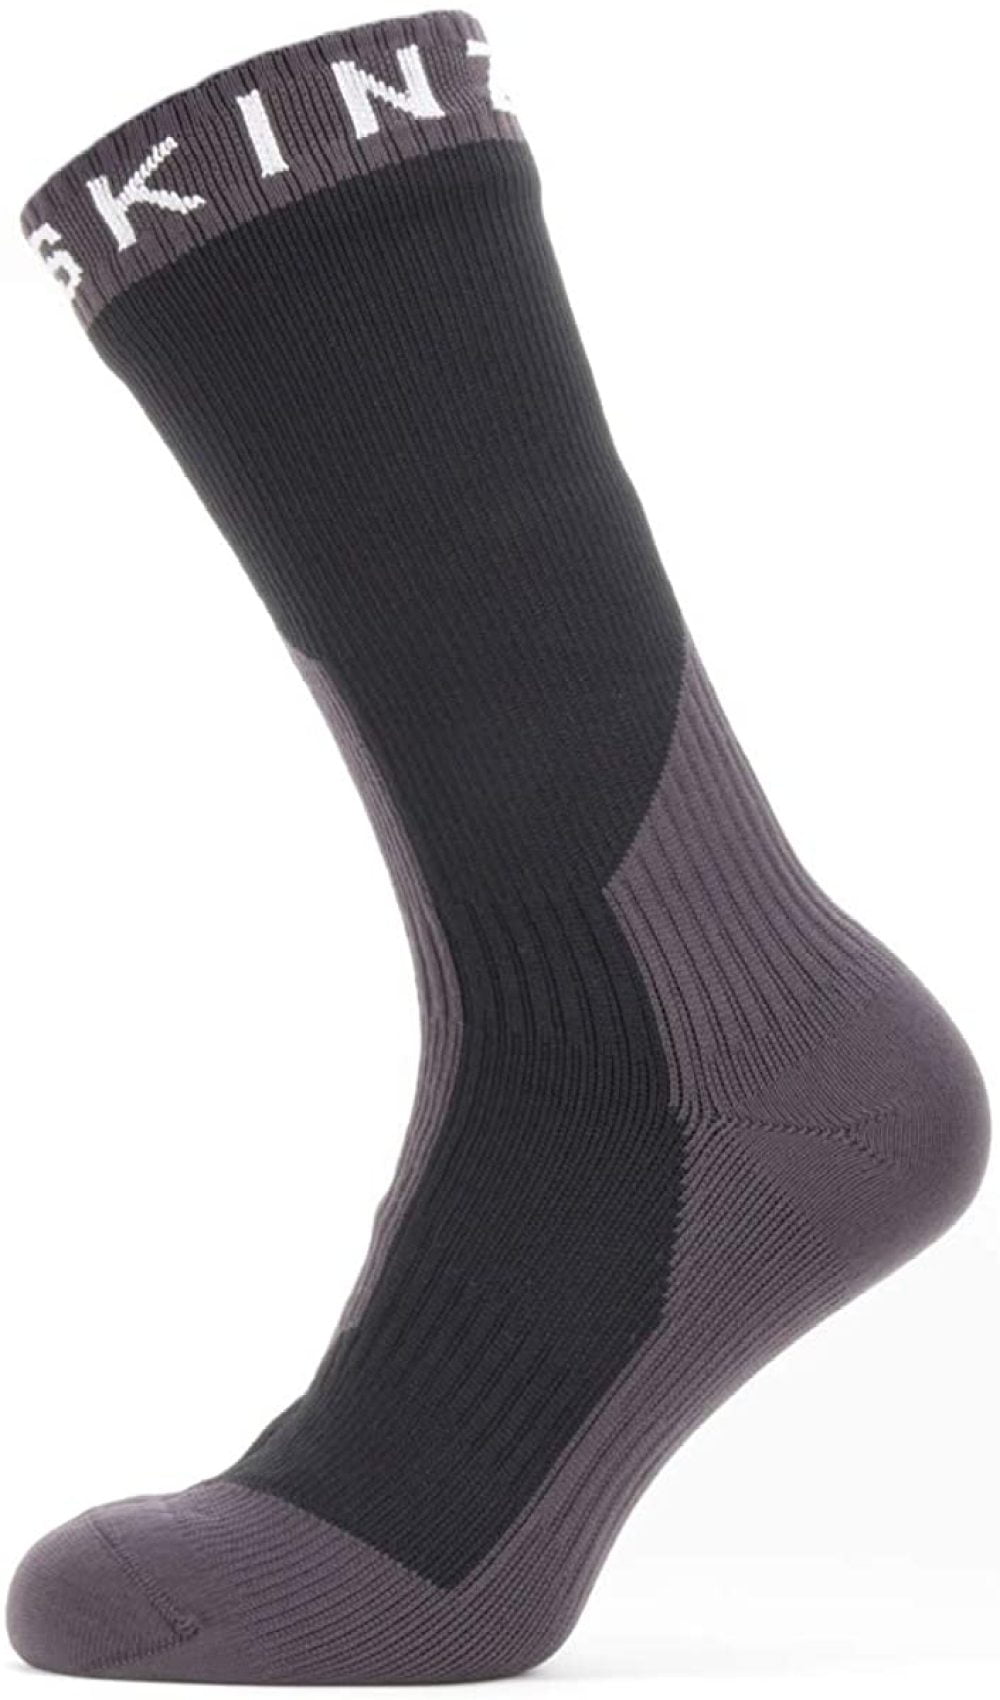 New Sealskinz Extreme Cold Weather Waterproof Mid Length Sock